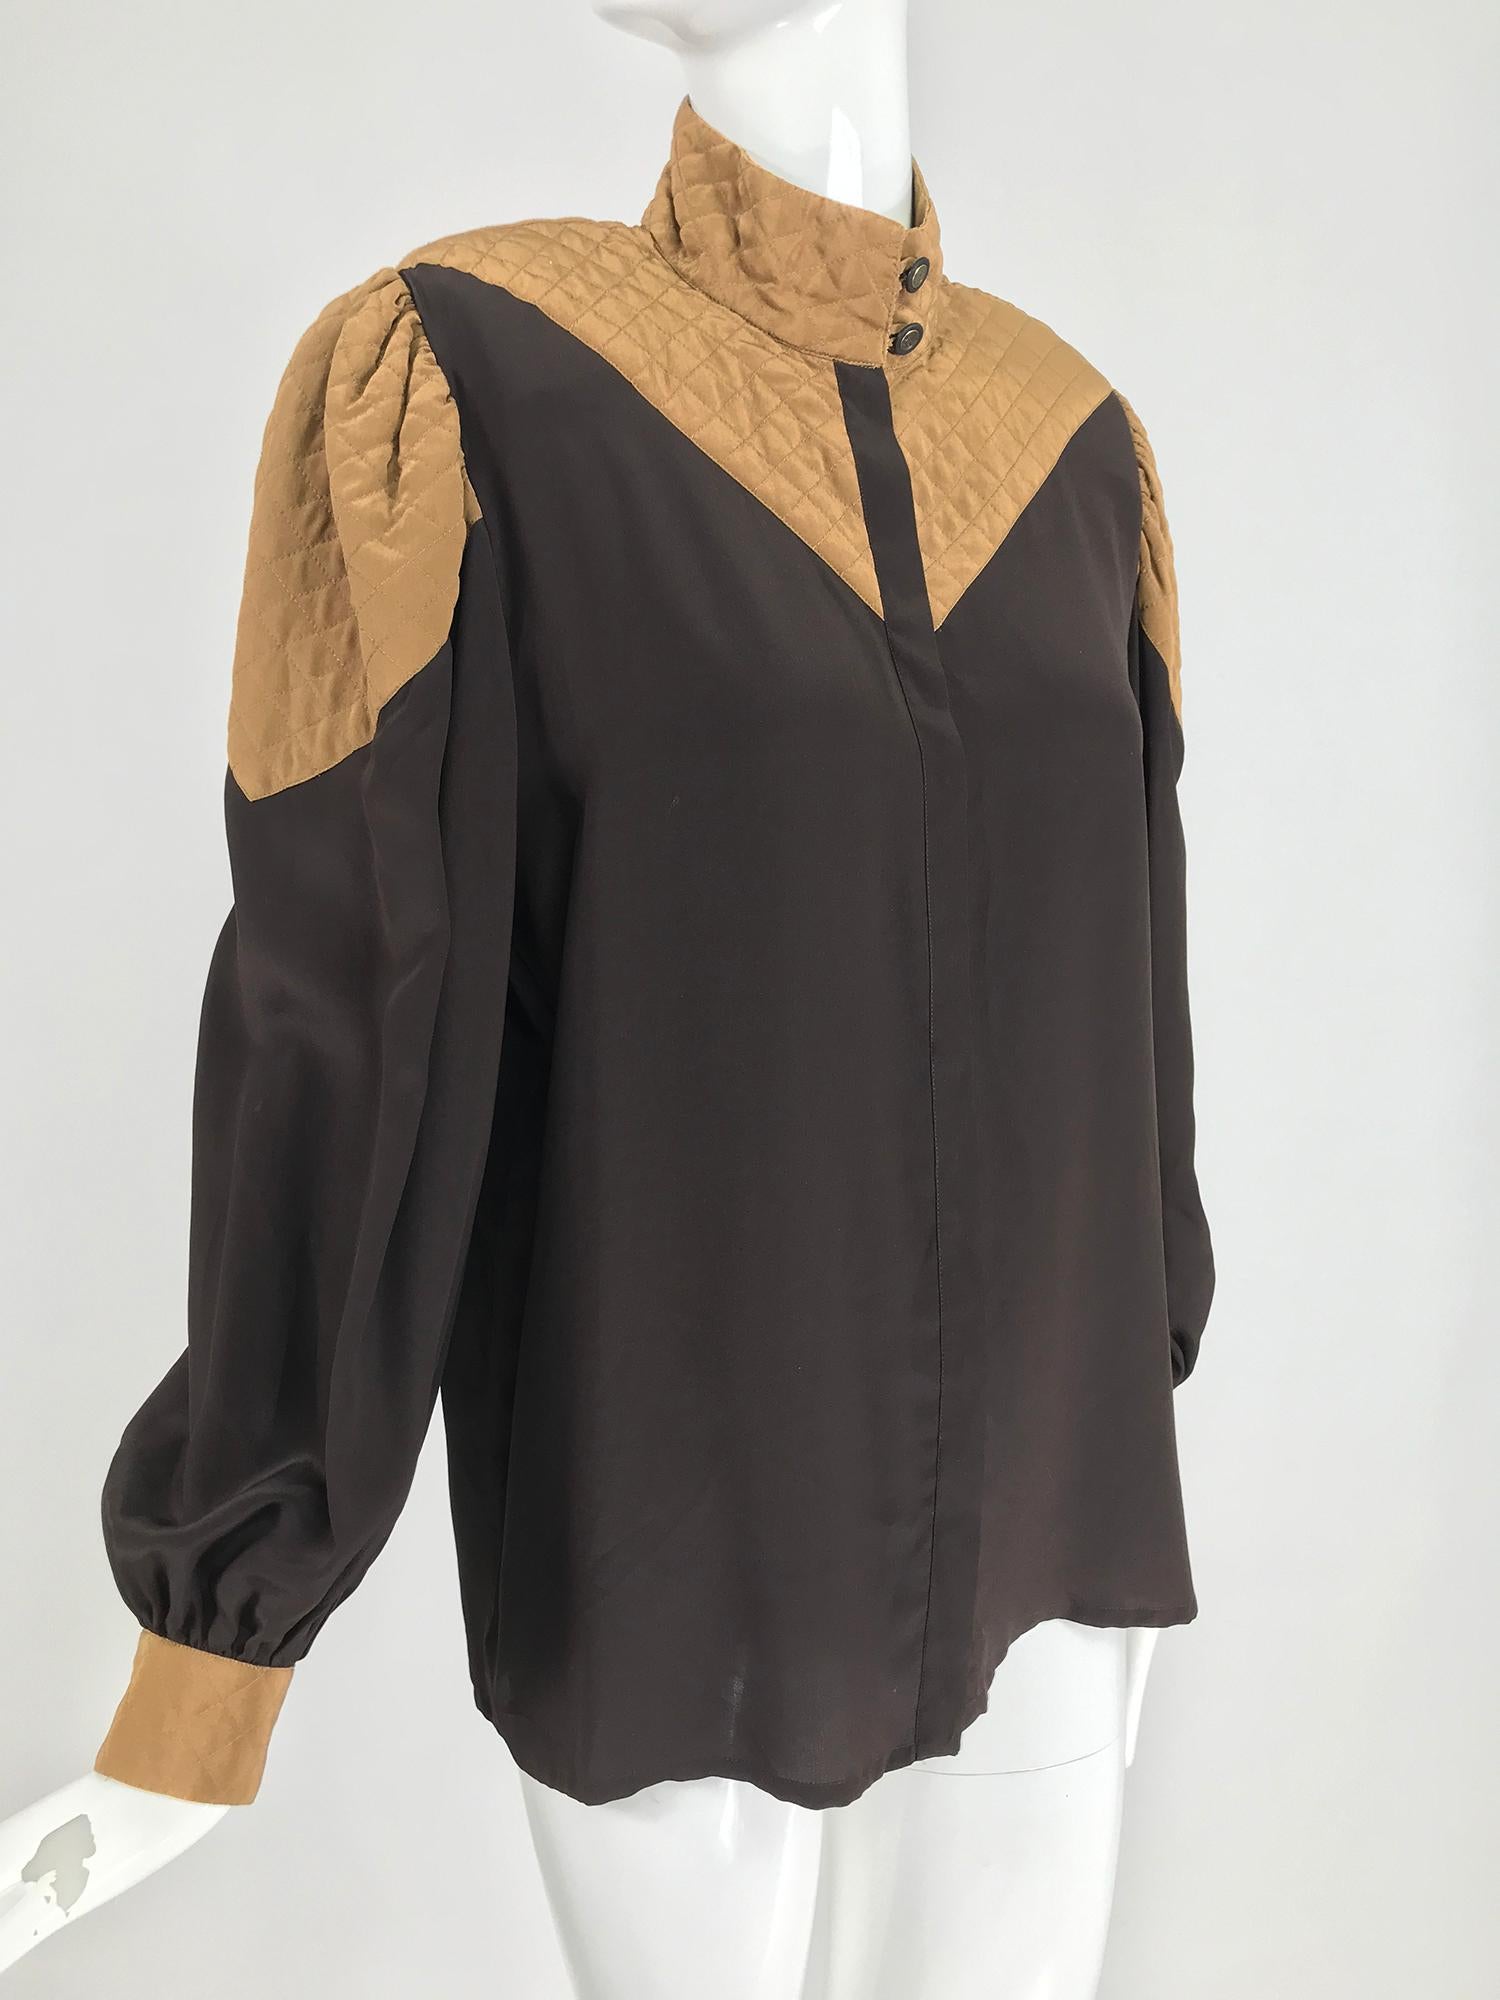 Vintage 1980s Chez Catherine Palm Beach silk blouse in dark chocolate brown with tan quilted band collar, yoke front and back, upper sleeves and cuffs. Pull on blouse closes at the front with a placket and buttons, cuffs button closed. Unlined. Fits